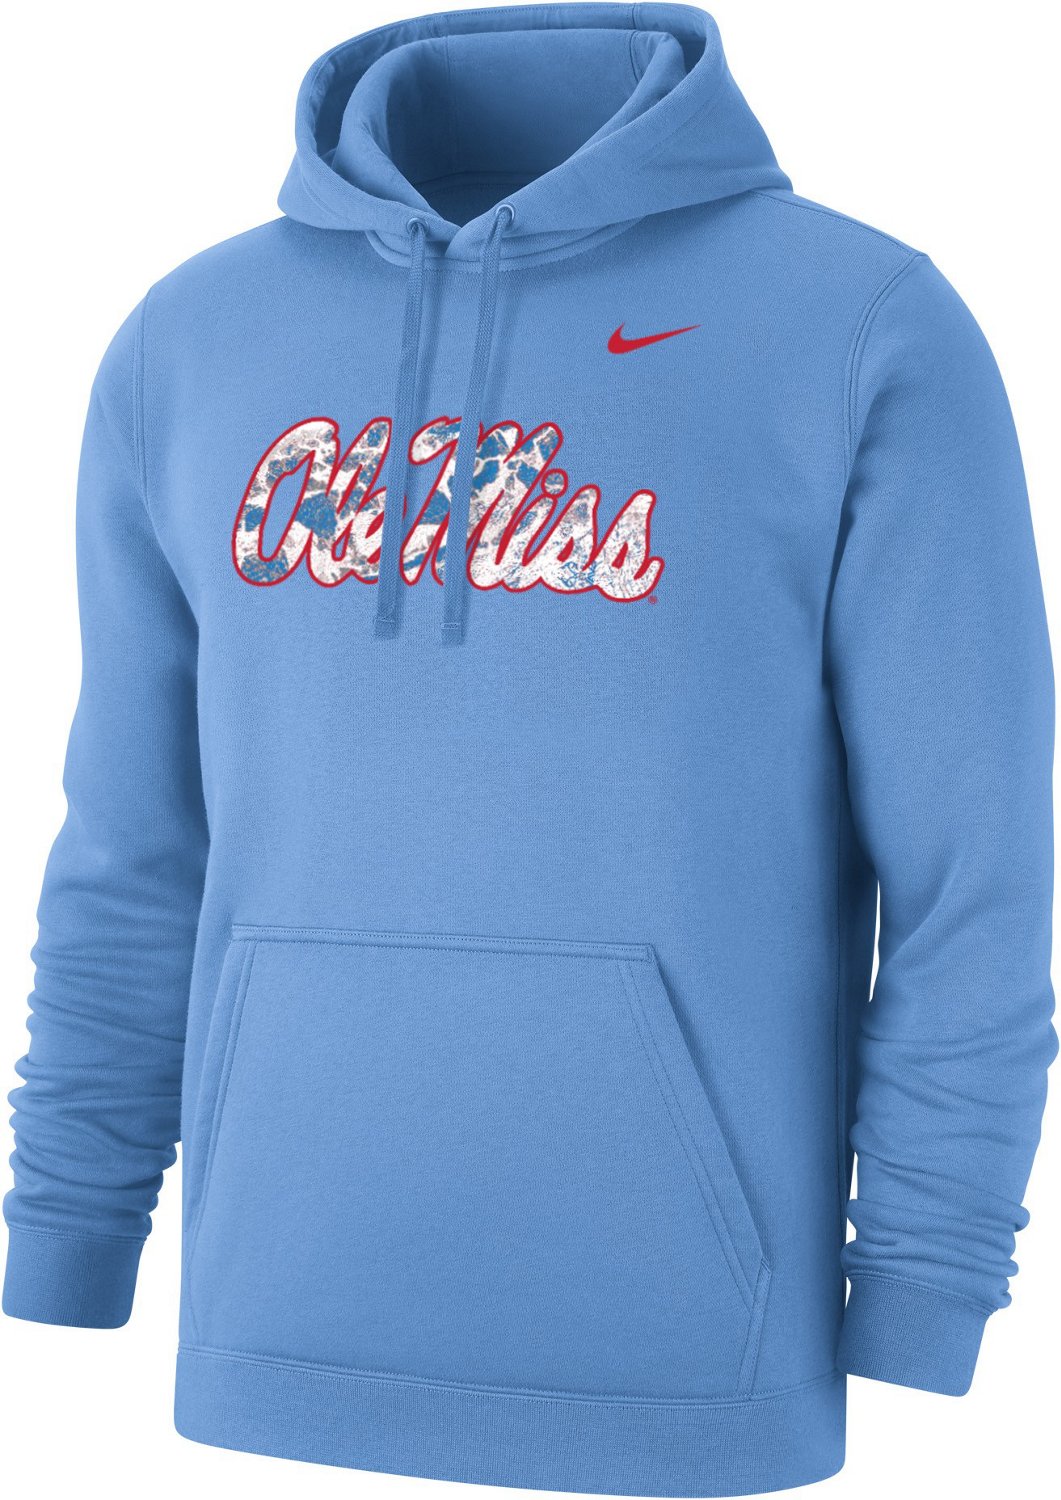 Nike Men's University of Mississippi Realtree Hoodie | Academy